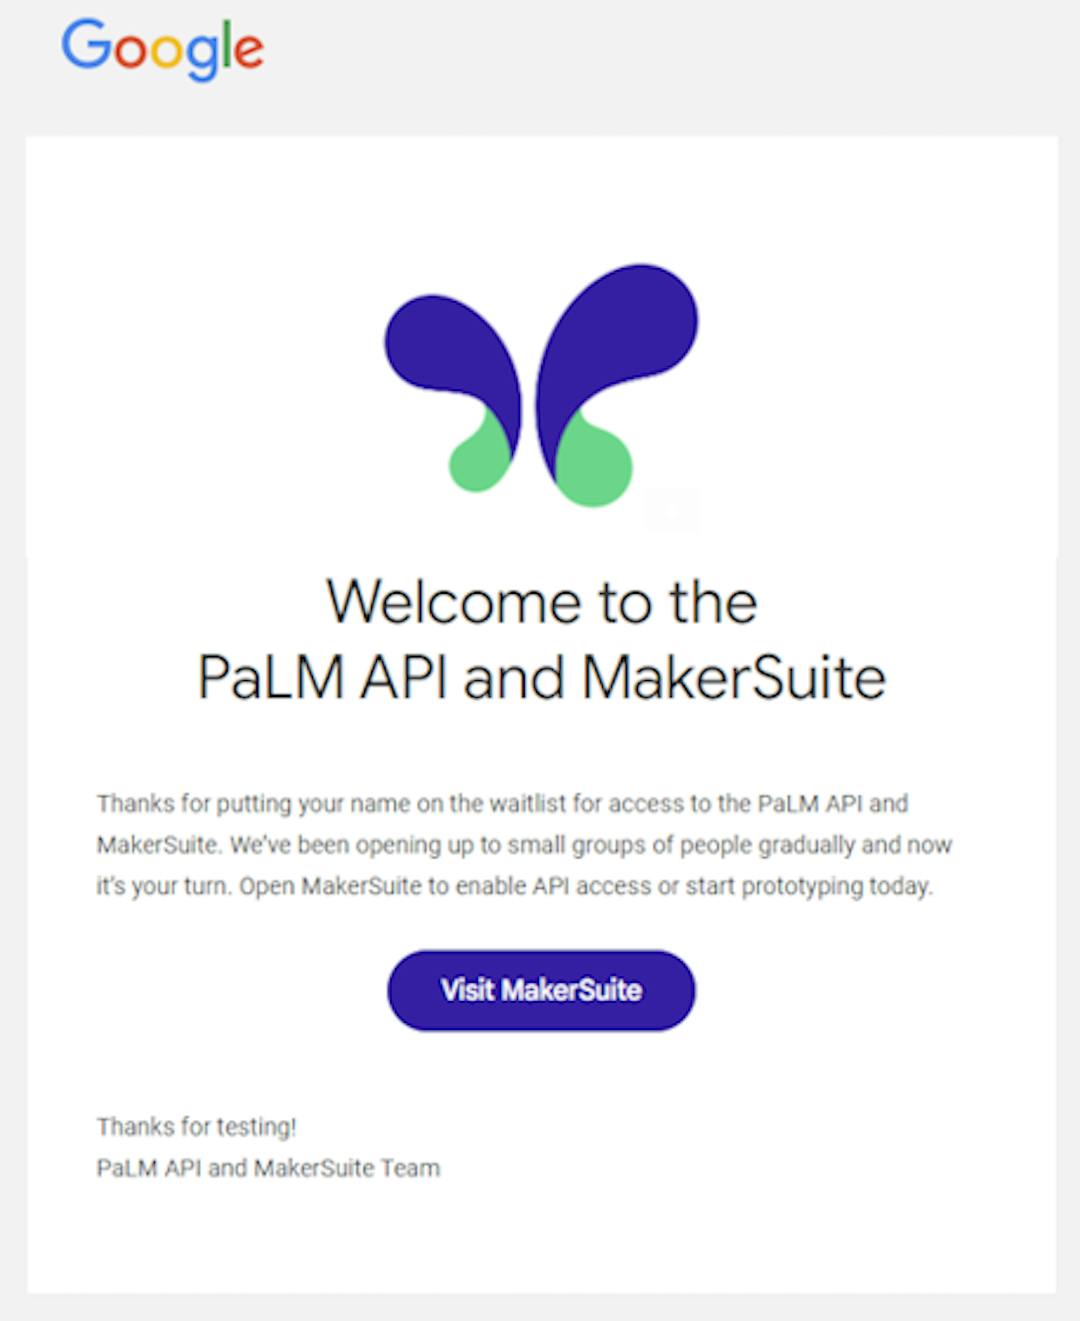 Welcome email from Google concerning access to PaLM API and MakerSuite